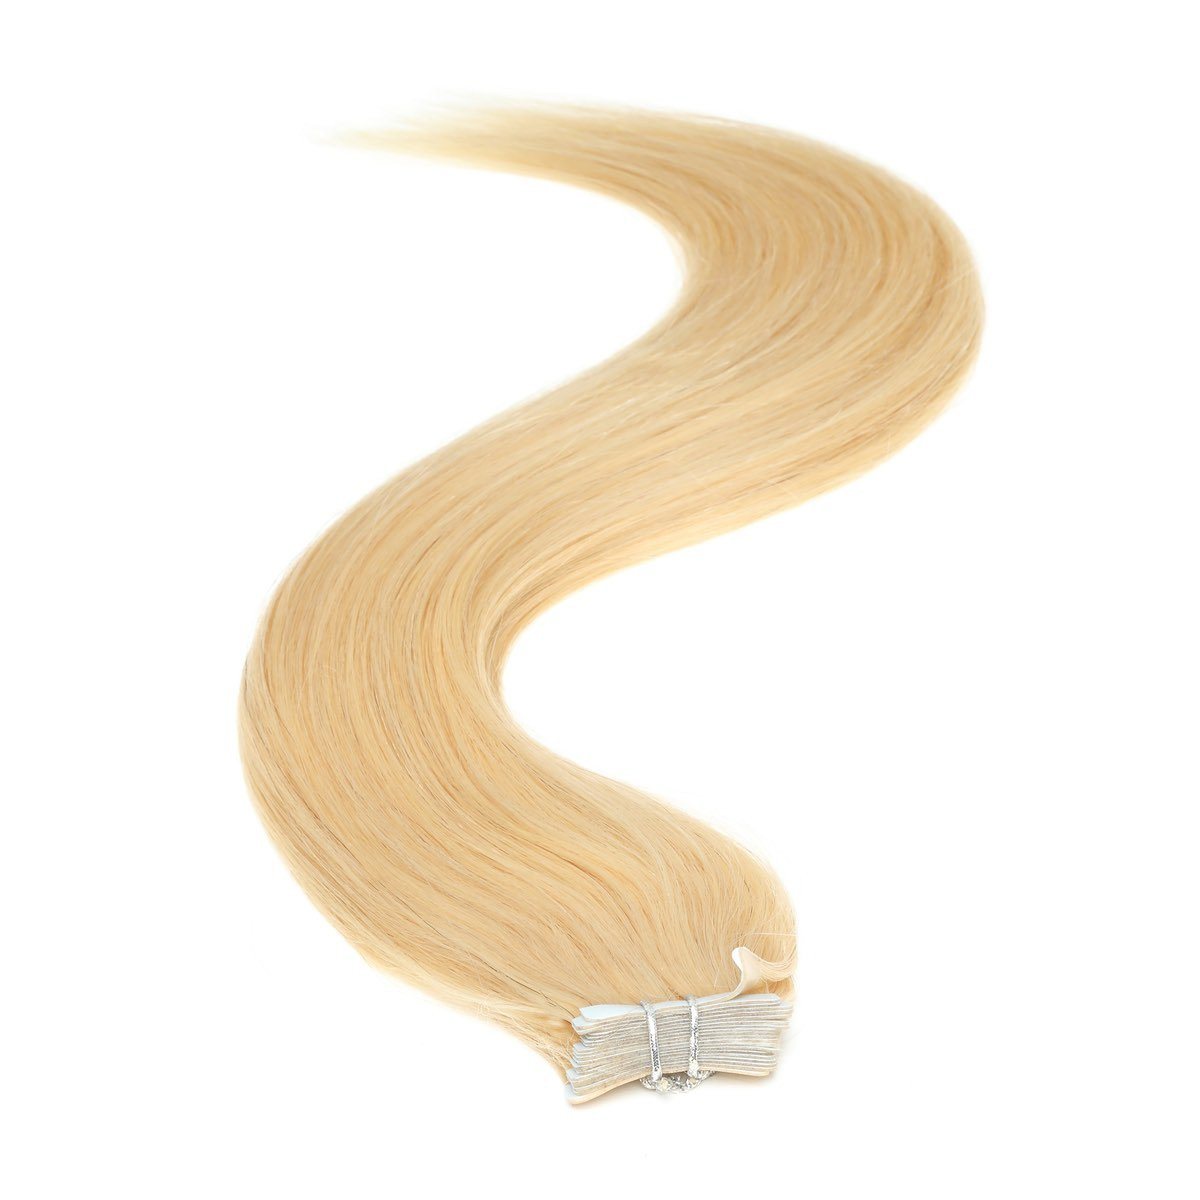 Tape in Hair Extensions | 18 inch | 20ps | 50g | Sunshine Blonde (24) - Beauty Hair Products LtdHair Extensions